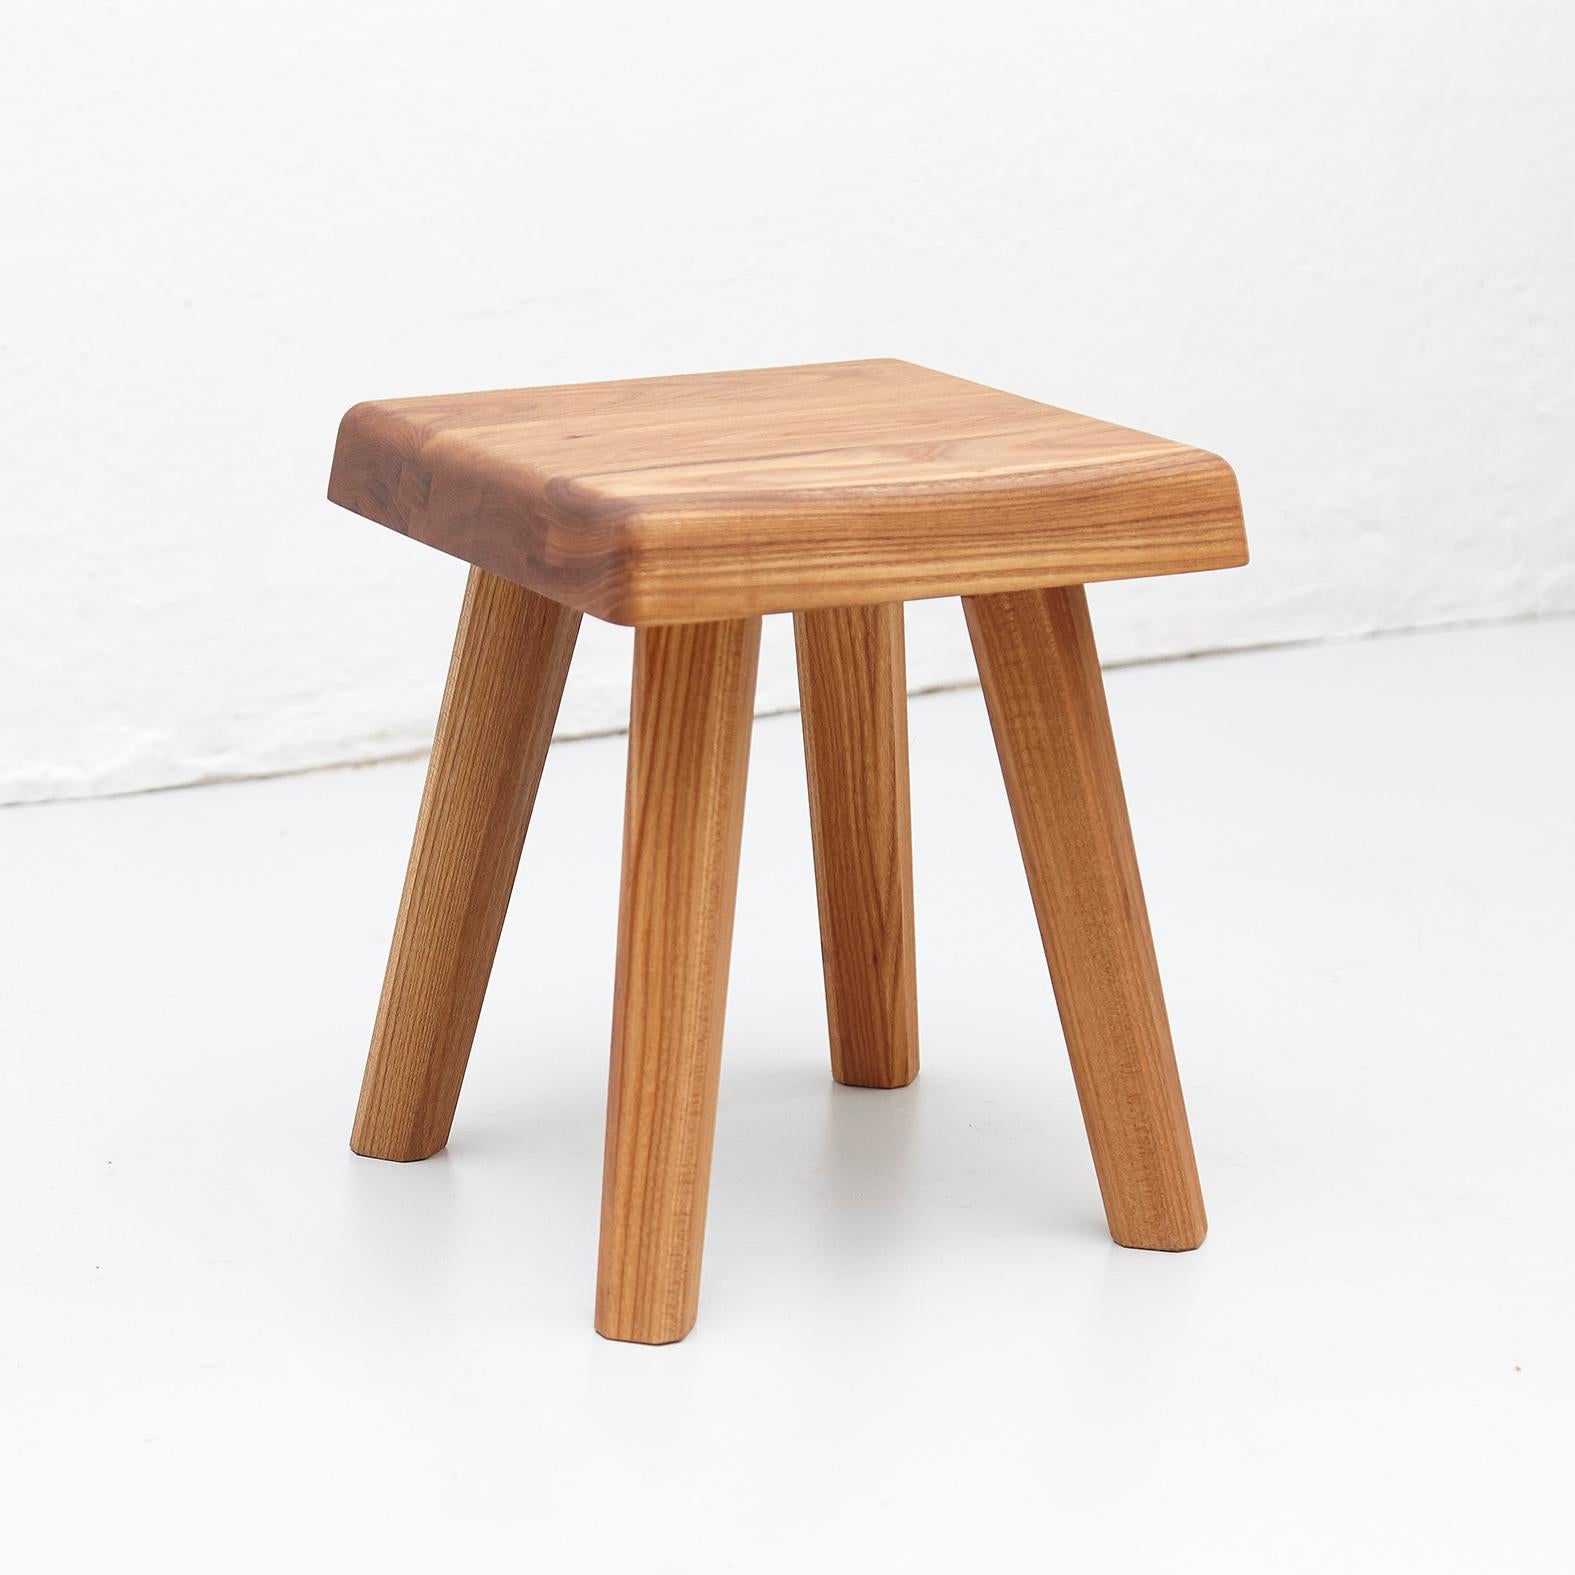 Stool designed by Pierre Chapo in 1960s.
 Manufactured by Creation Chapo in France in 2019.

Solid elmwood.

In good original condition, with minor wear consistent with age and use, preserving a beautiful patina.

Pierre Chapo is born in a